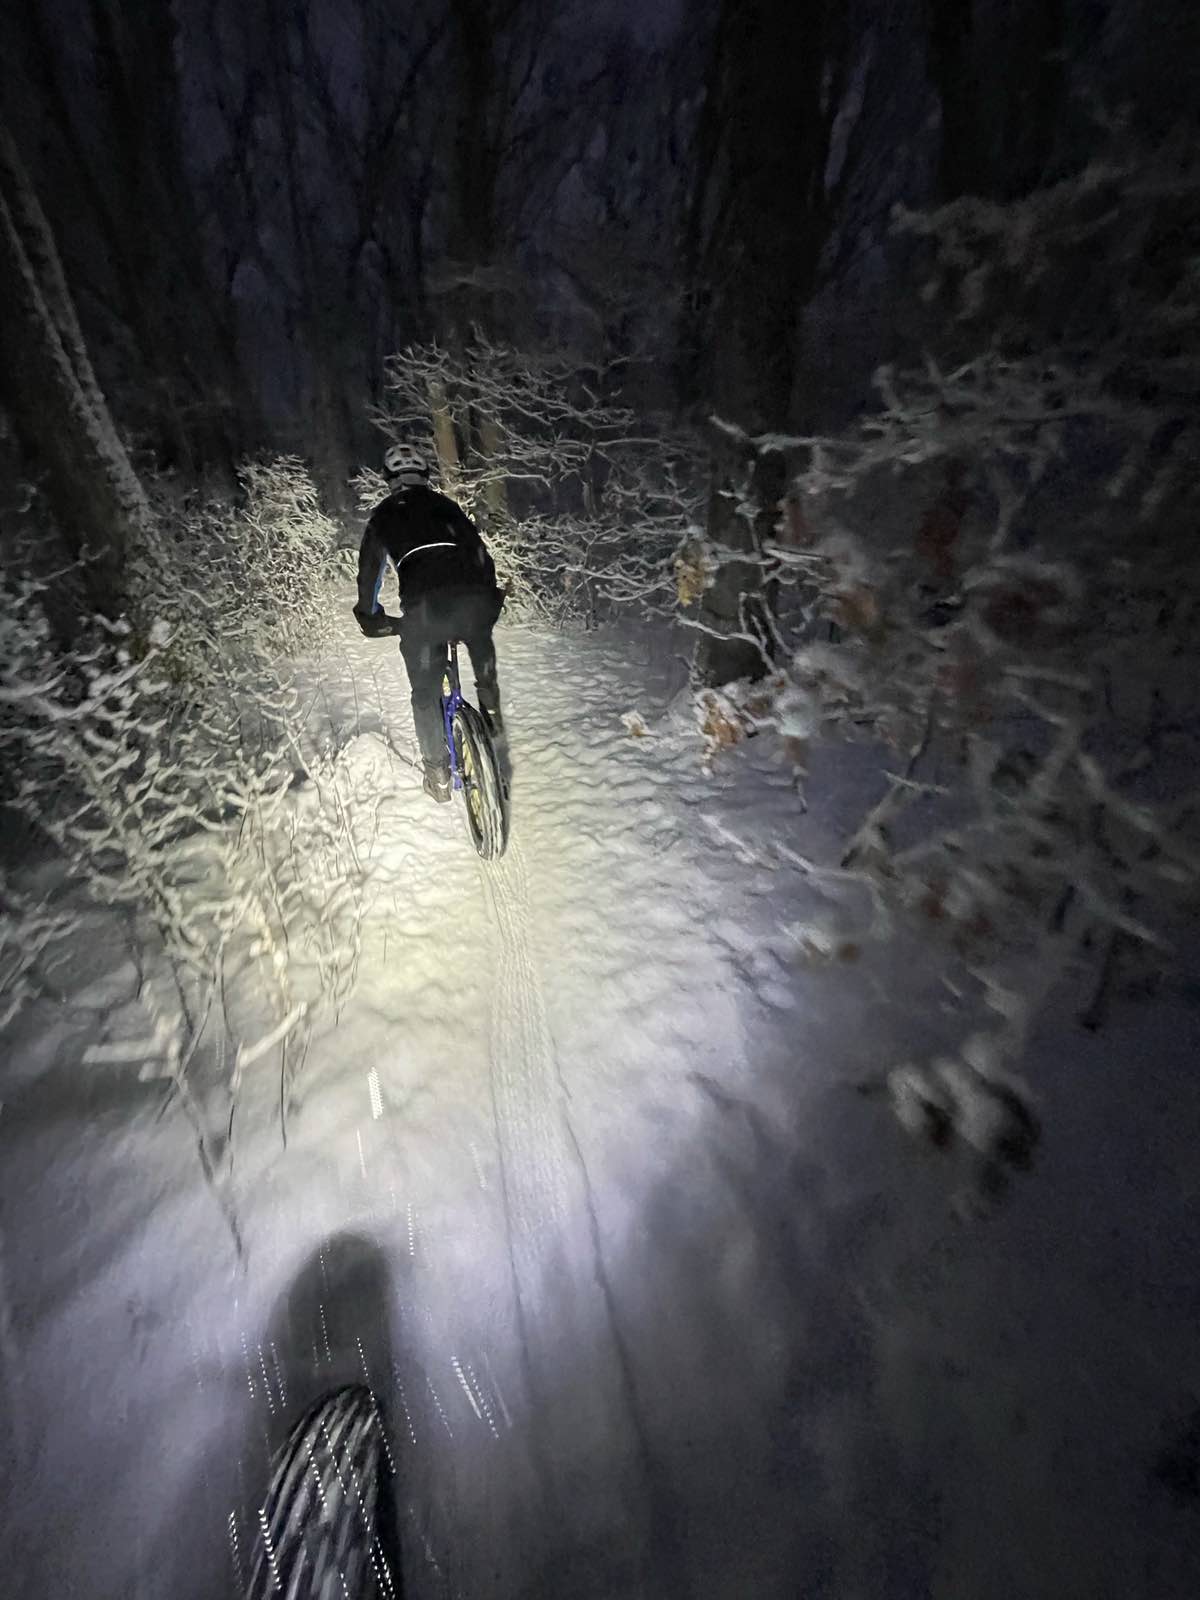 bikerumor pic of the day two bike riders at night in a snow storm outside boston. the headlamp of the first rider is lighting up the trail and the second rider.